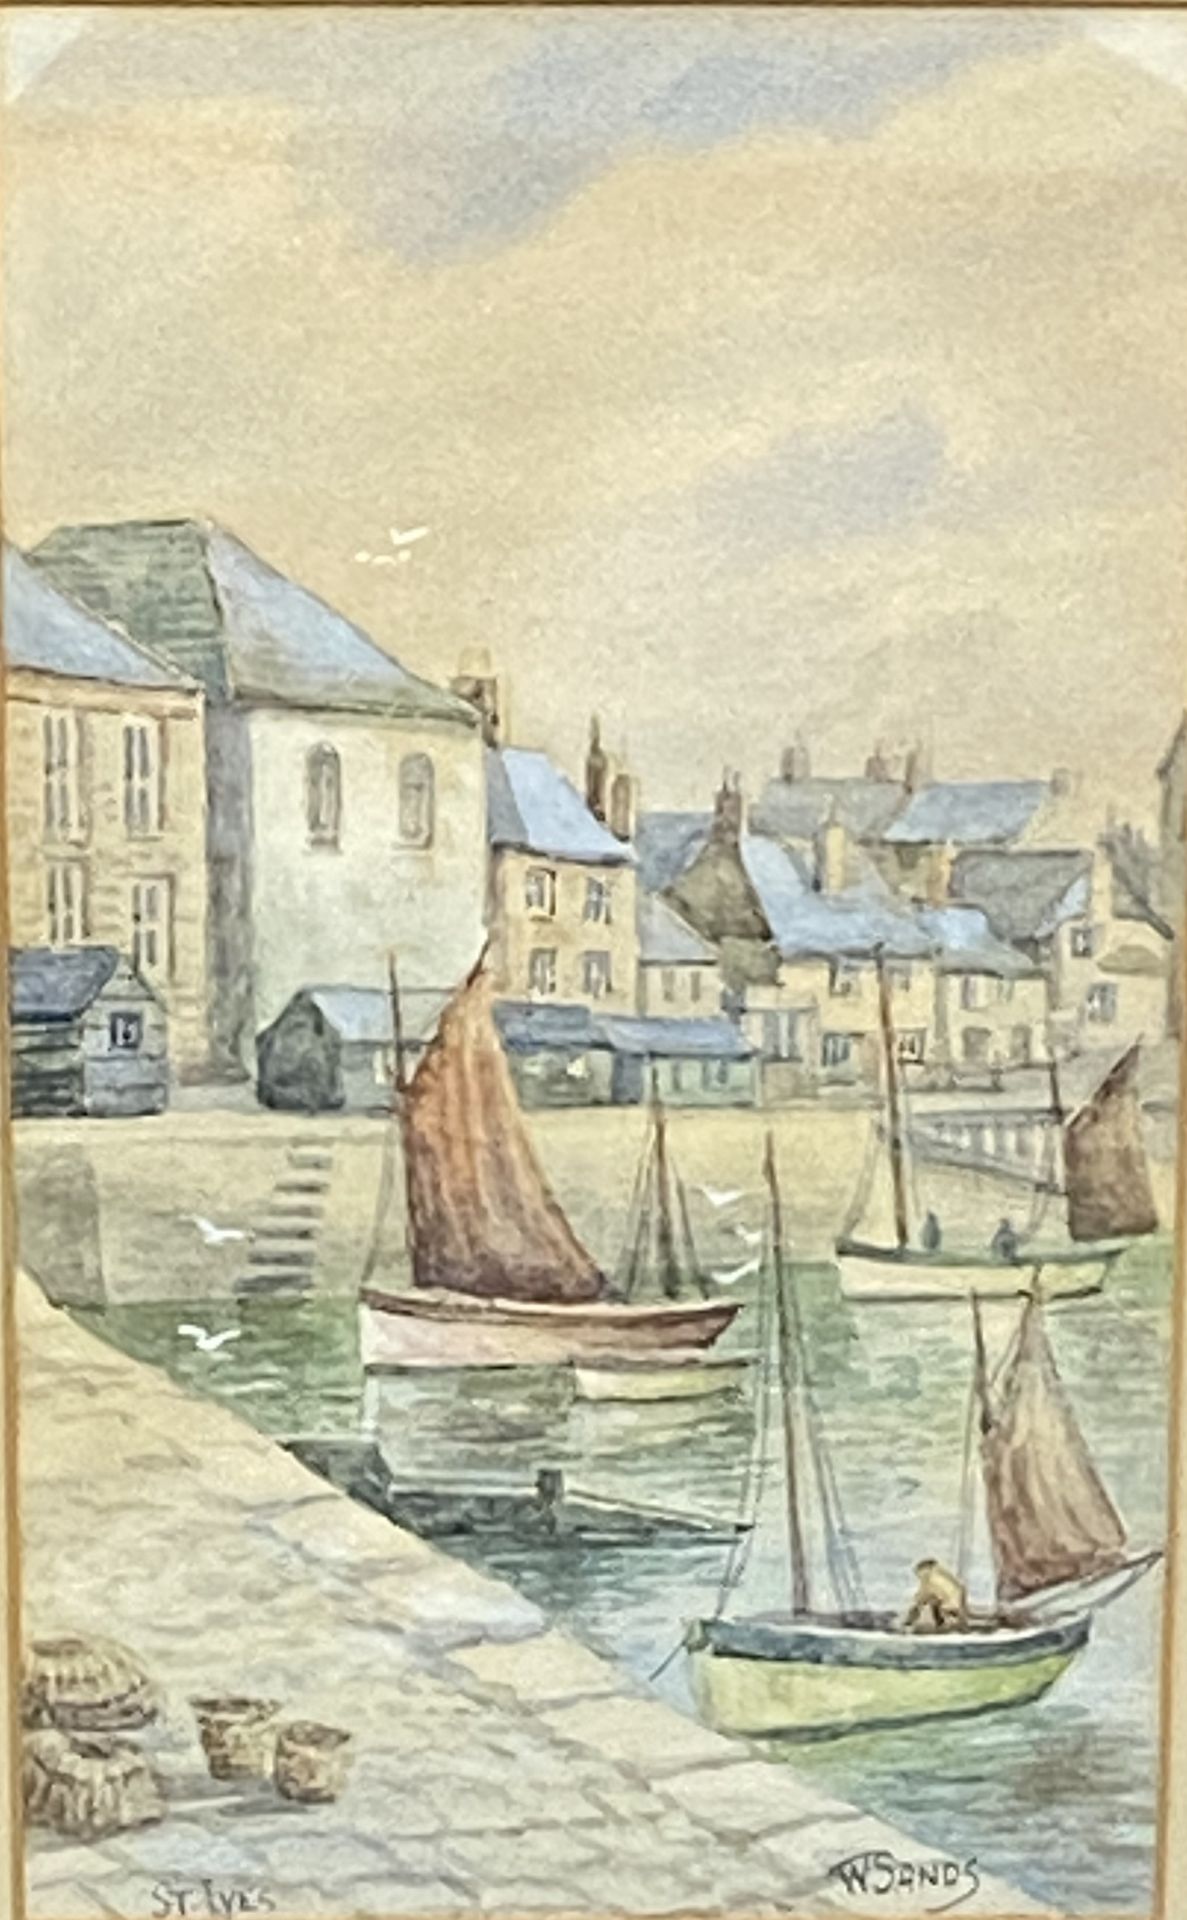 Two watercolours of St. Ives